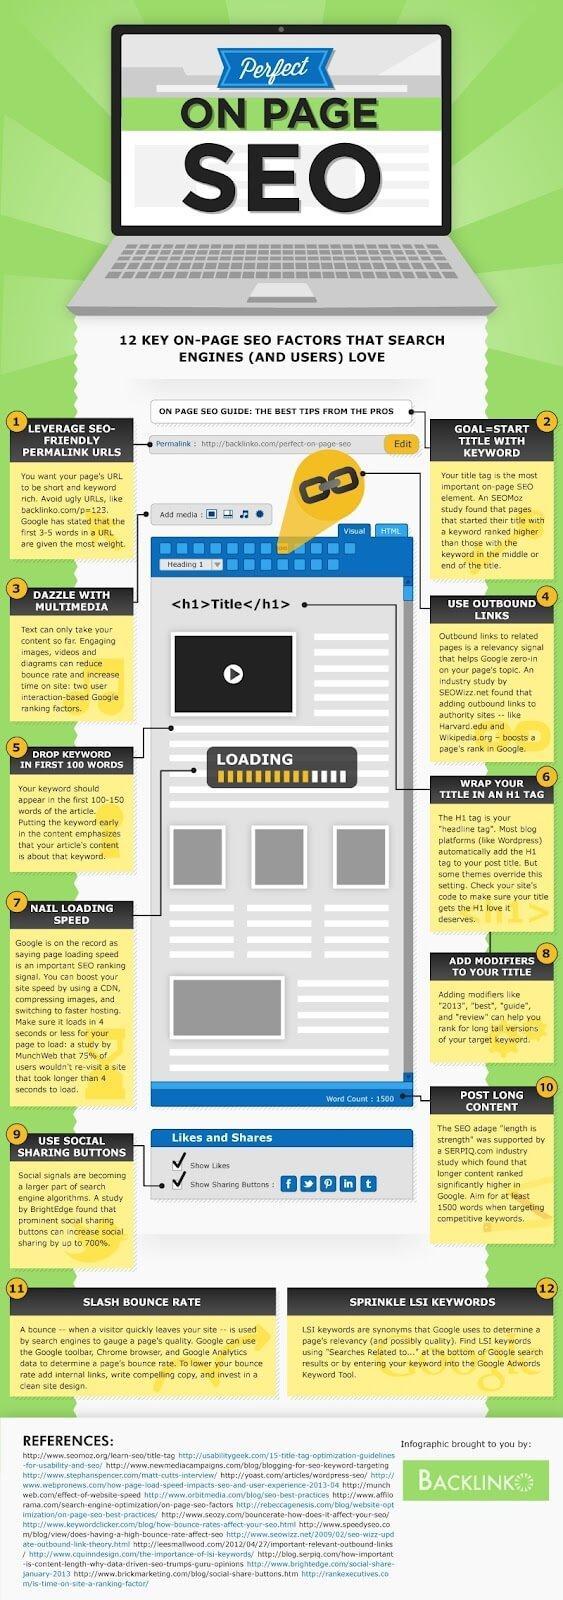 on page SEO infographic